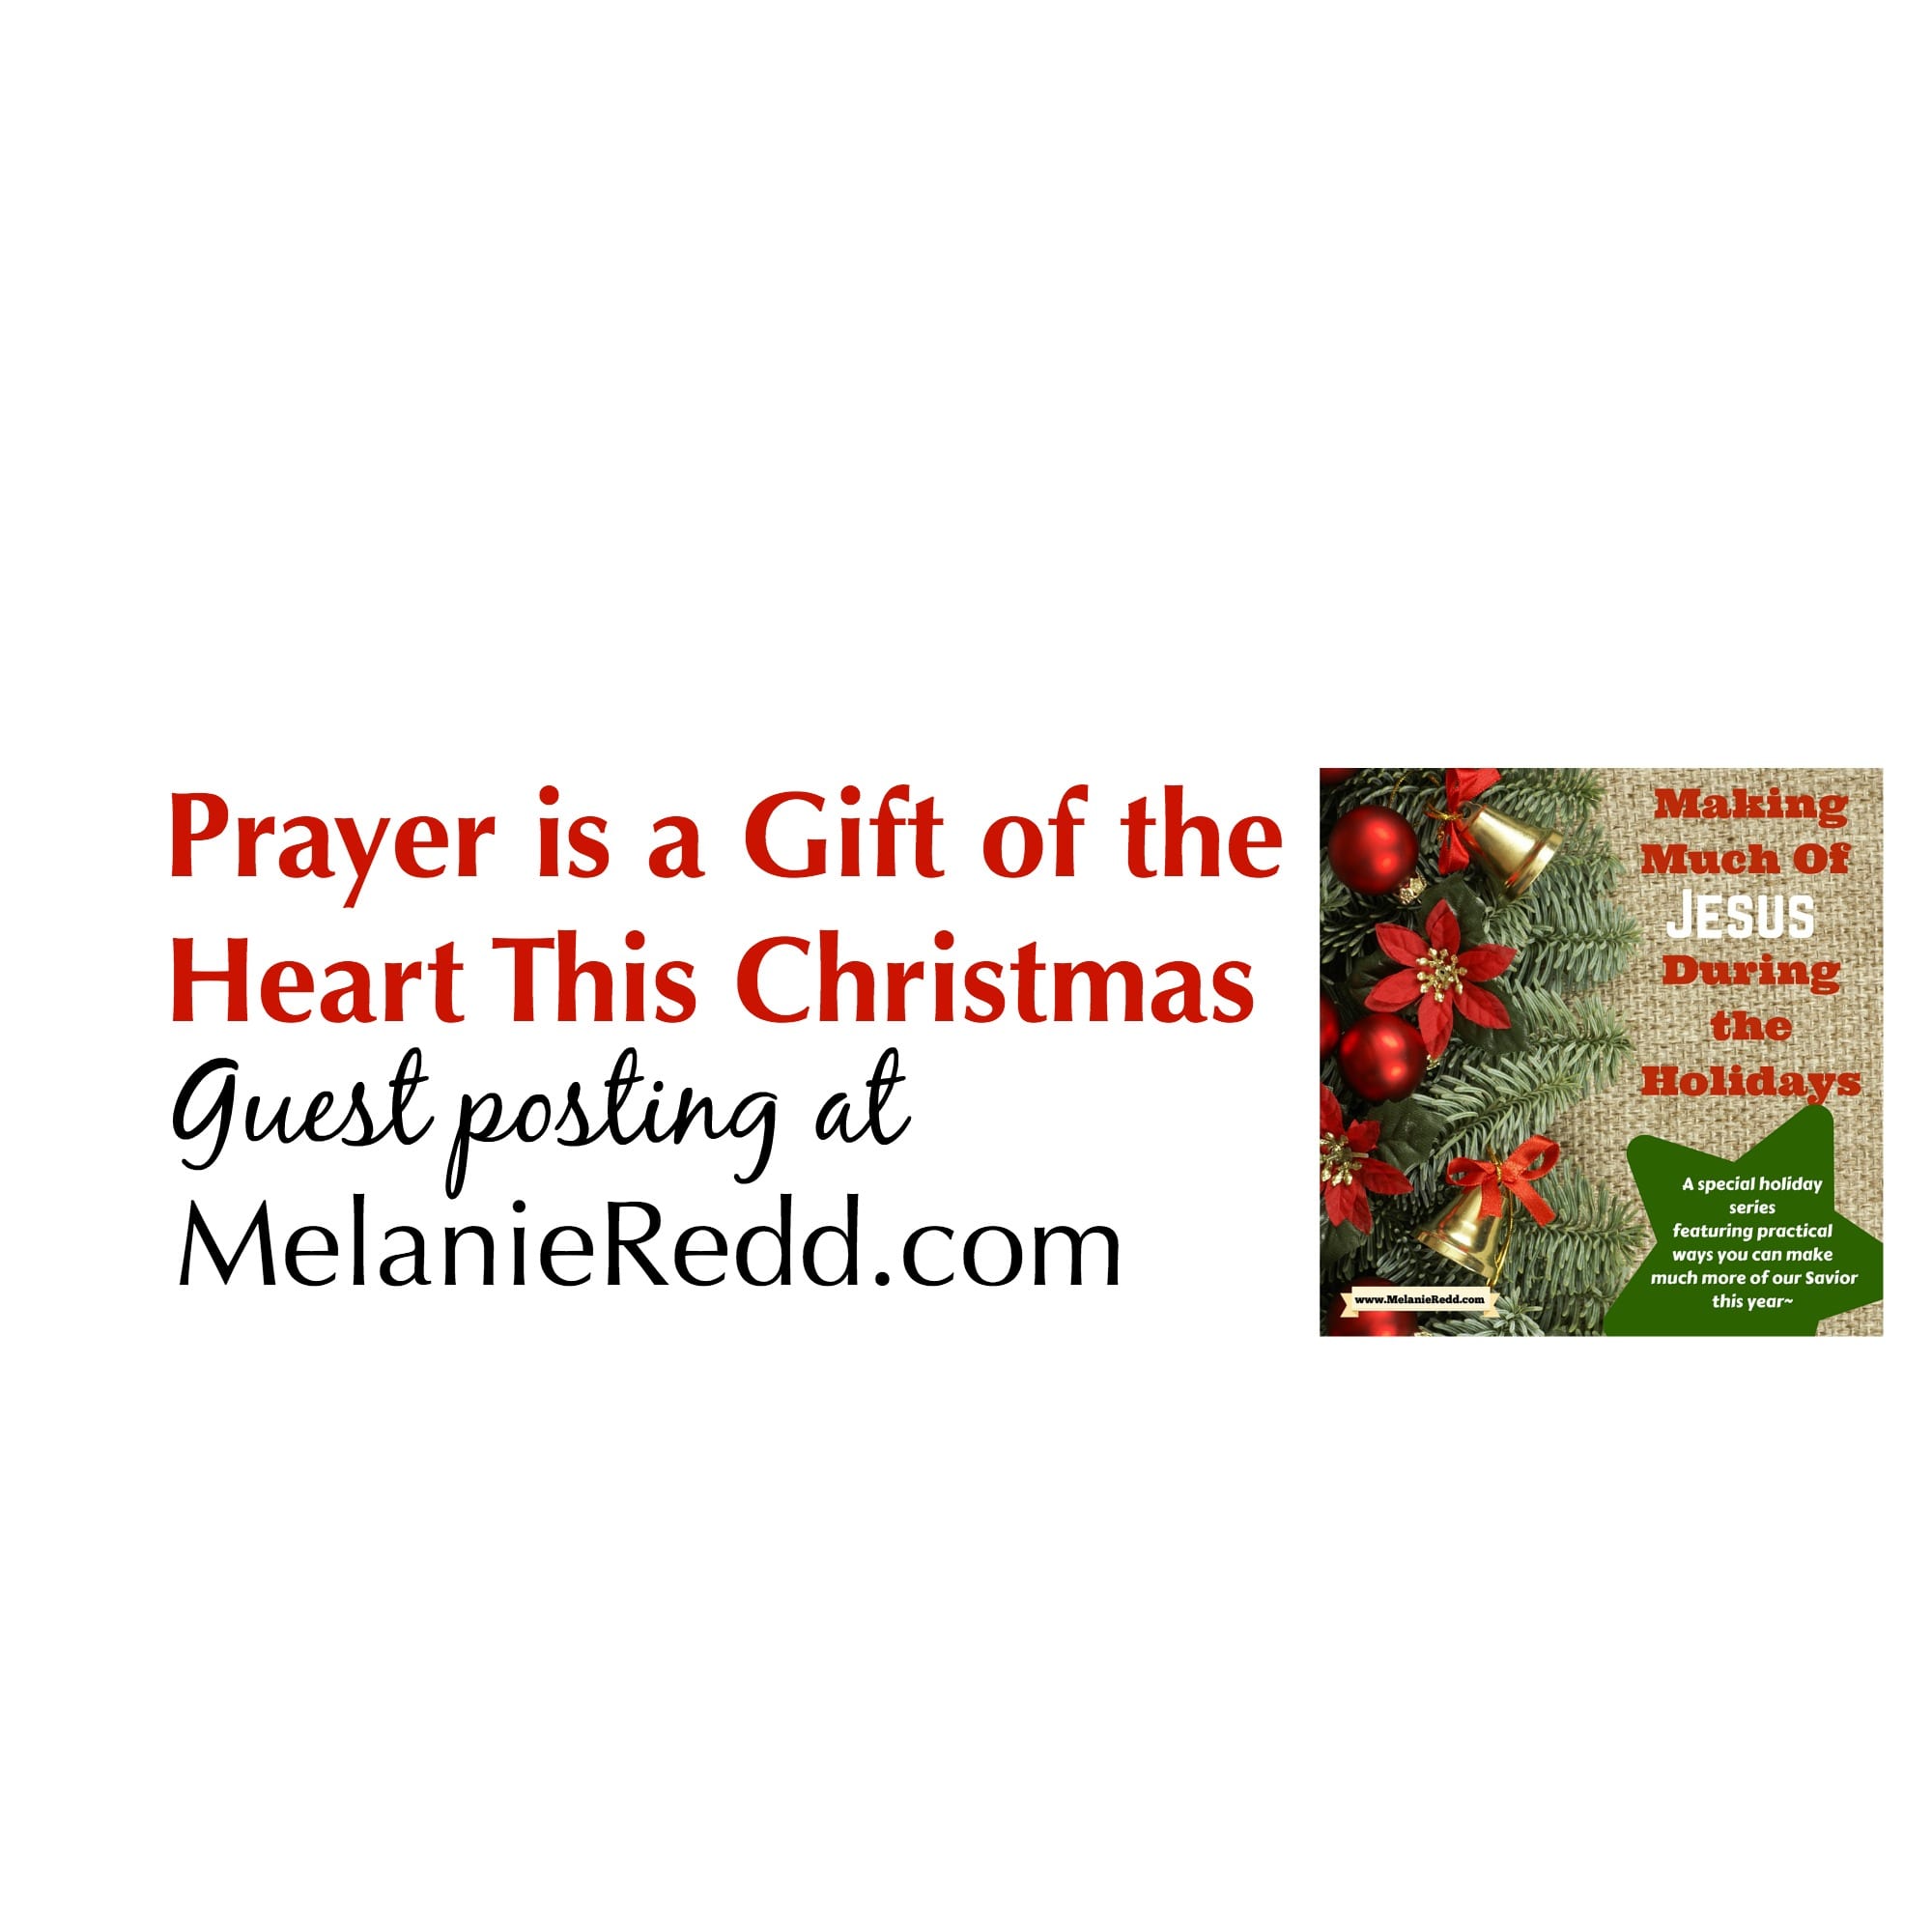 Prayer is a Gift of the Heart This Christmas